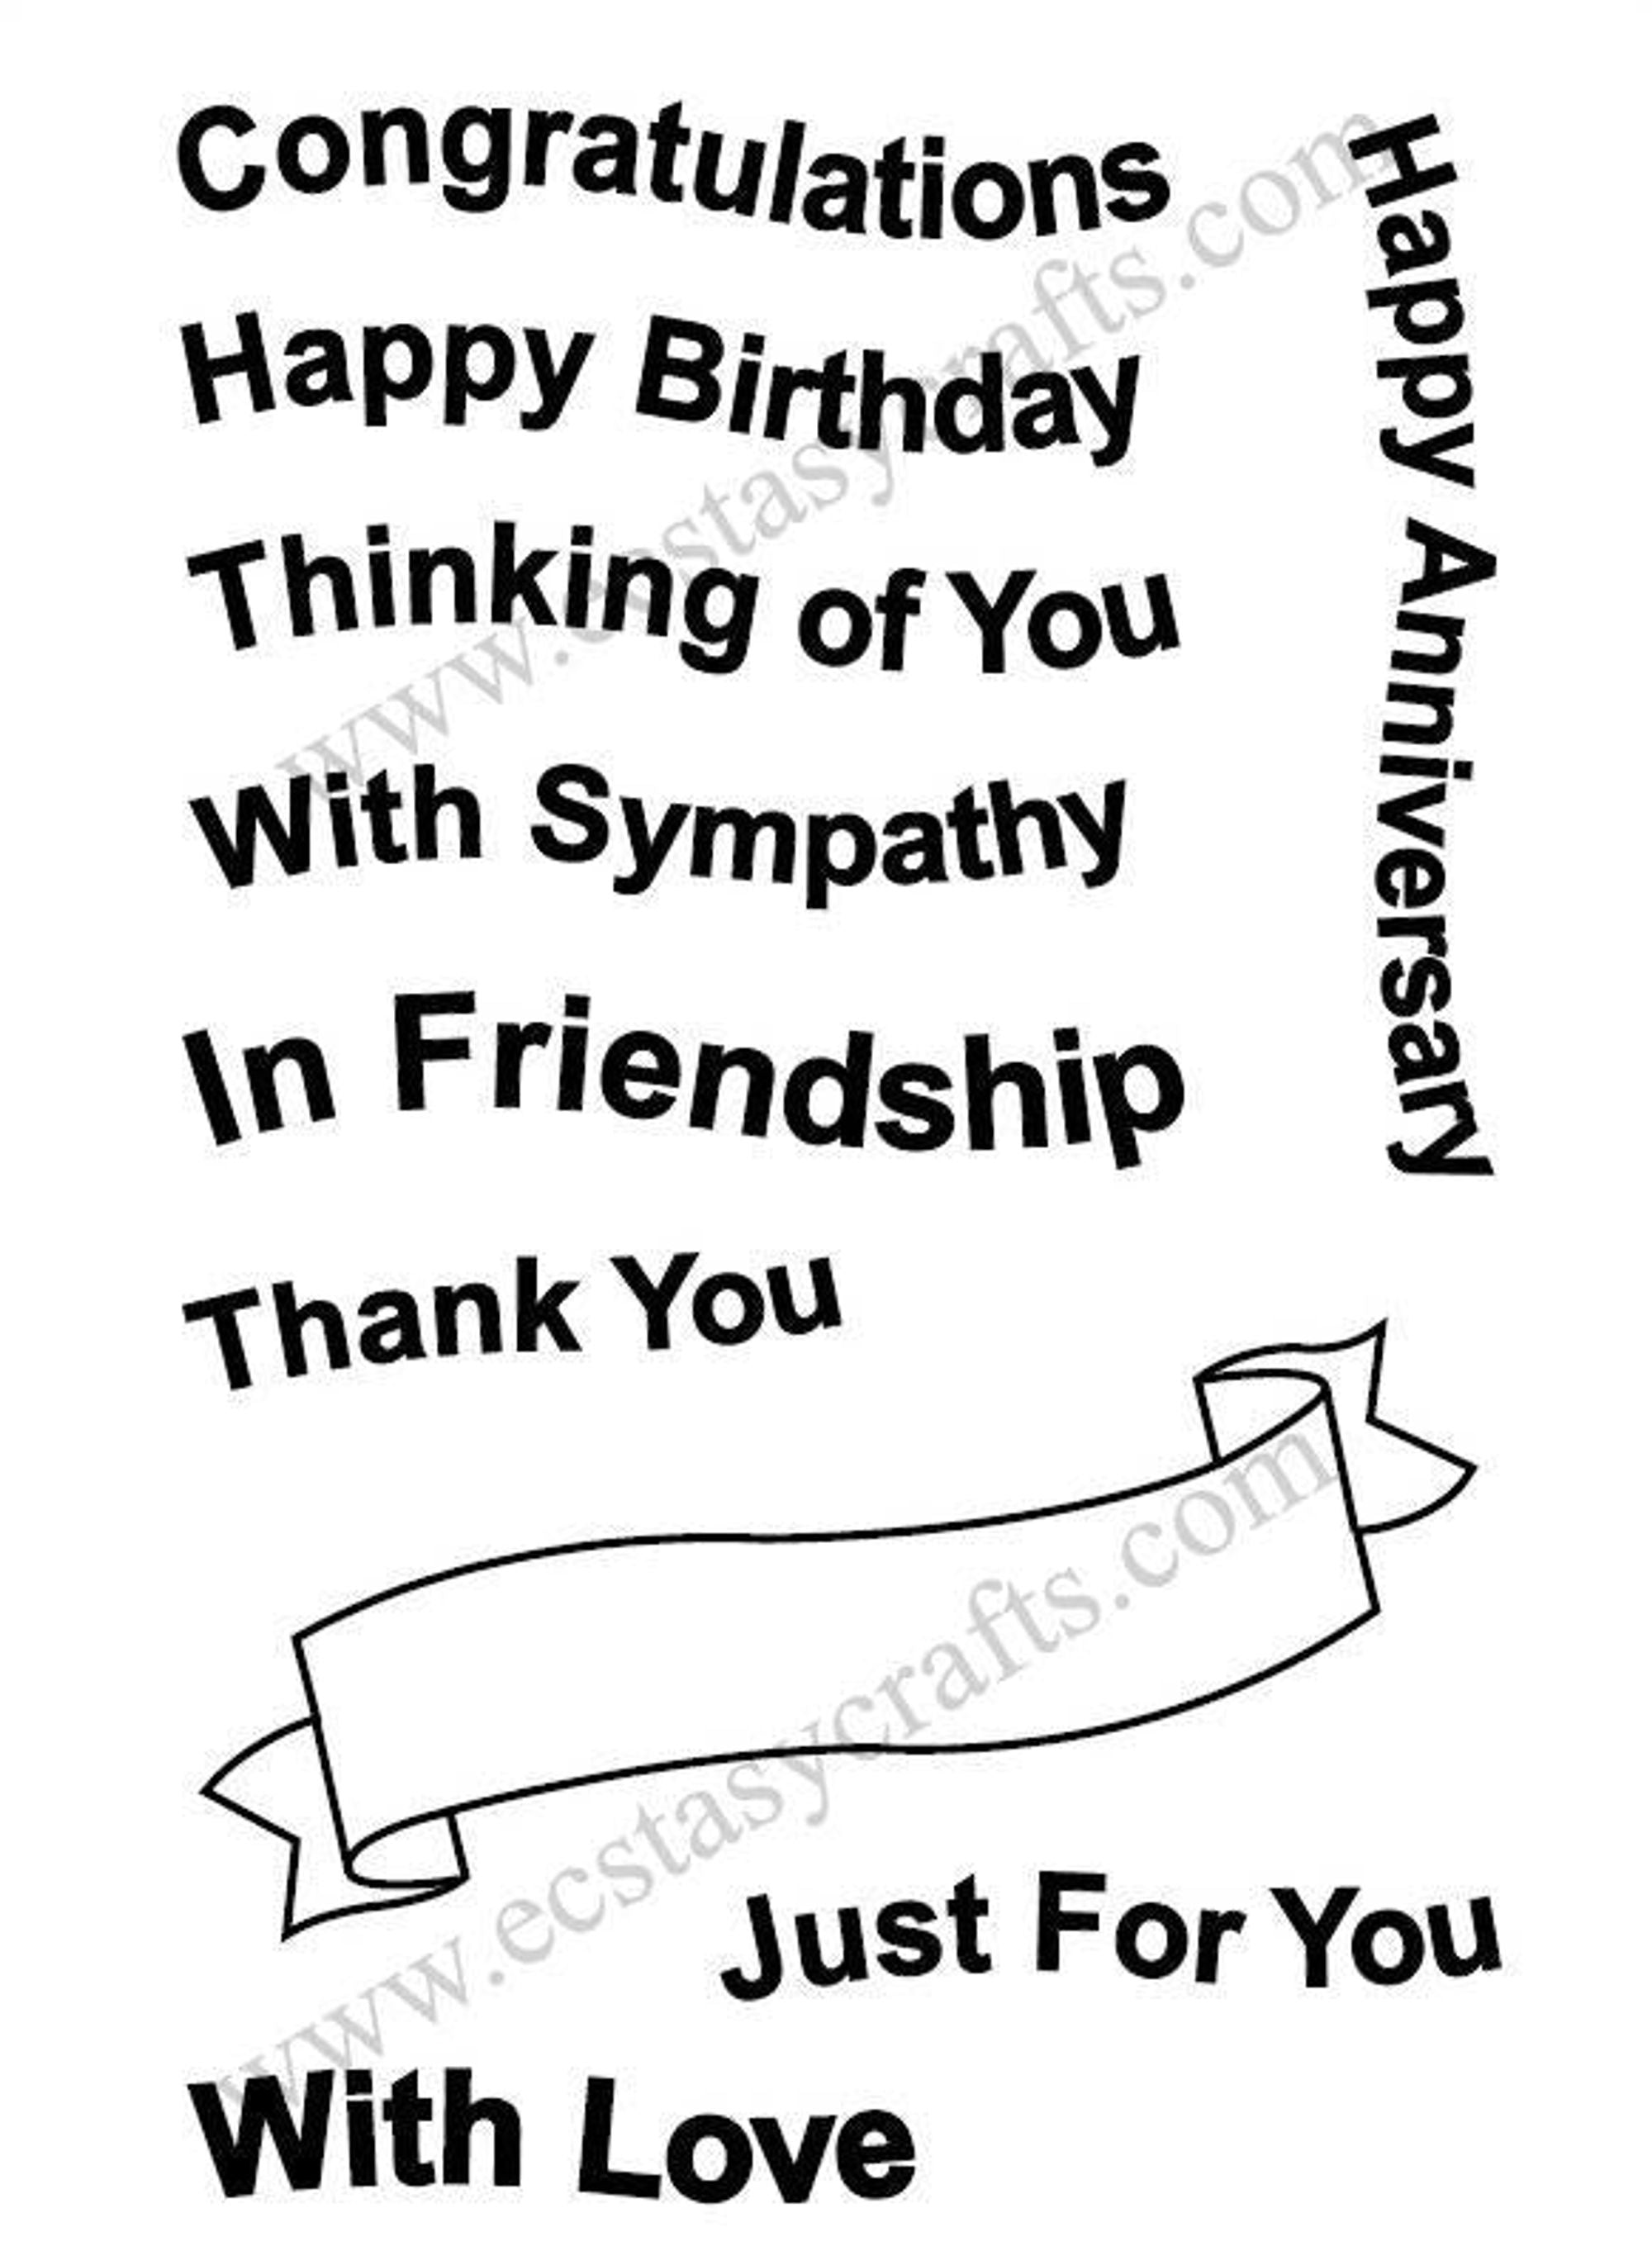 Frantic Stamper Clear Stamp Set - Wavy Banners and Greetings